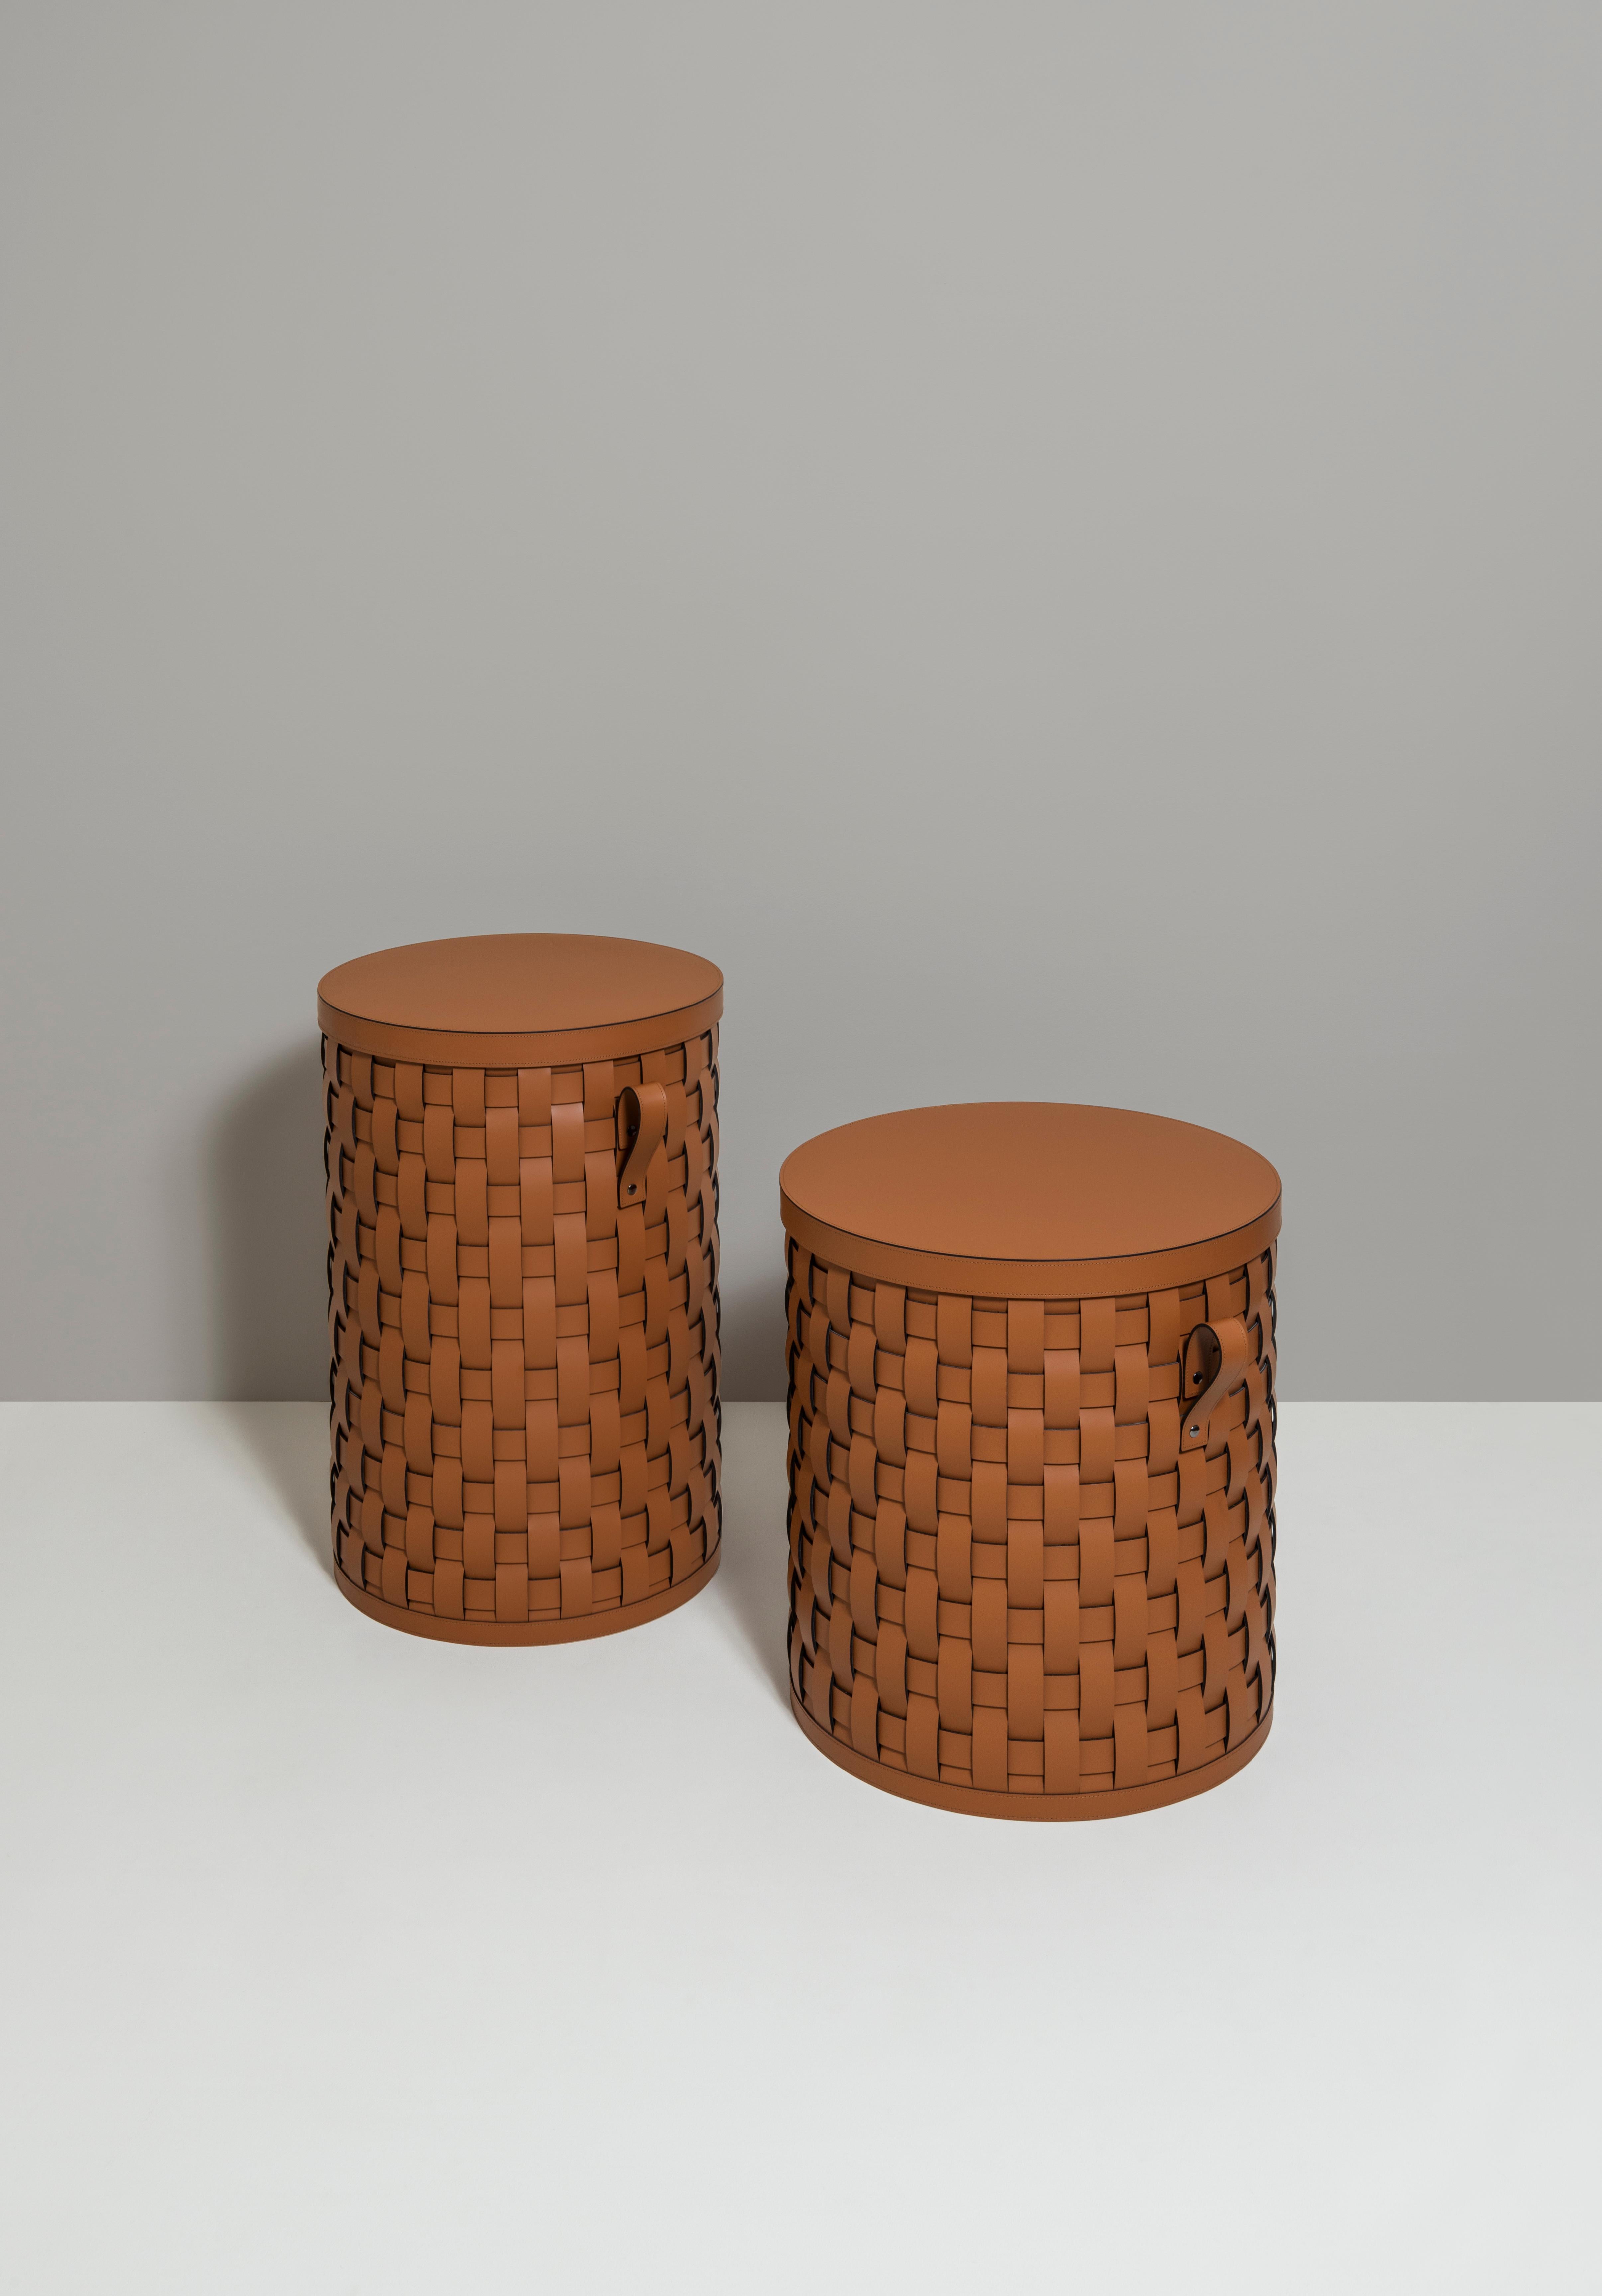 Pinetti's tall Demetra basket is handmade in Italy from eco-friendly and water-resistant brown leather making it useful for indoor or outdoor storage use.